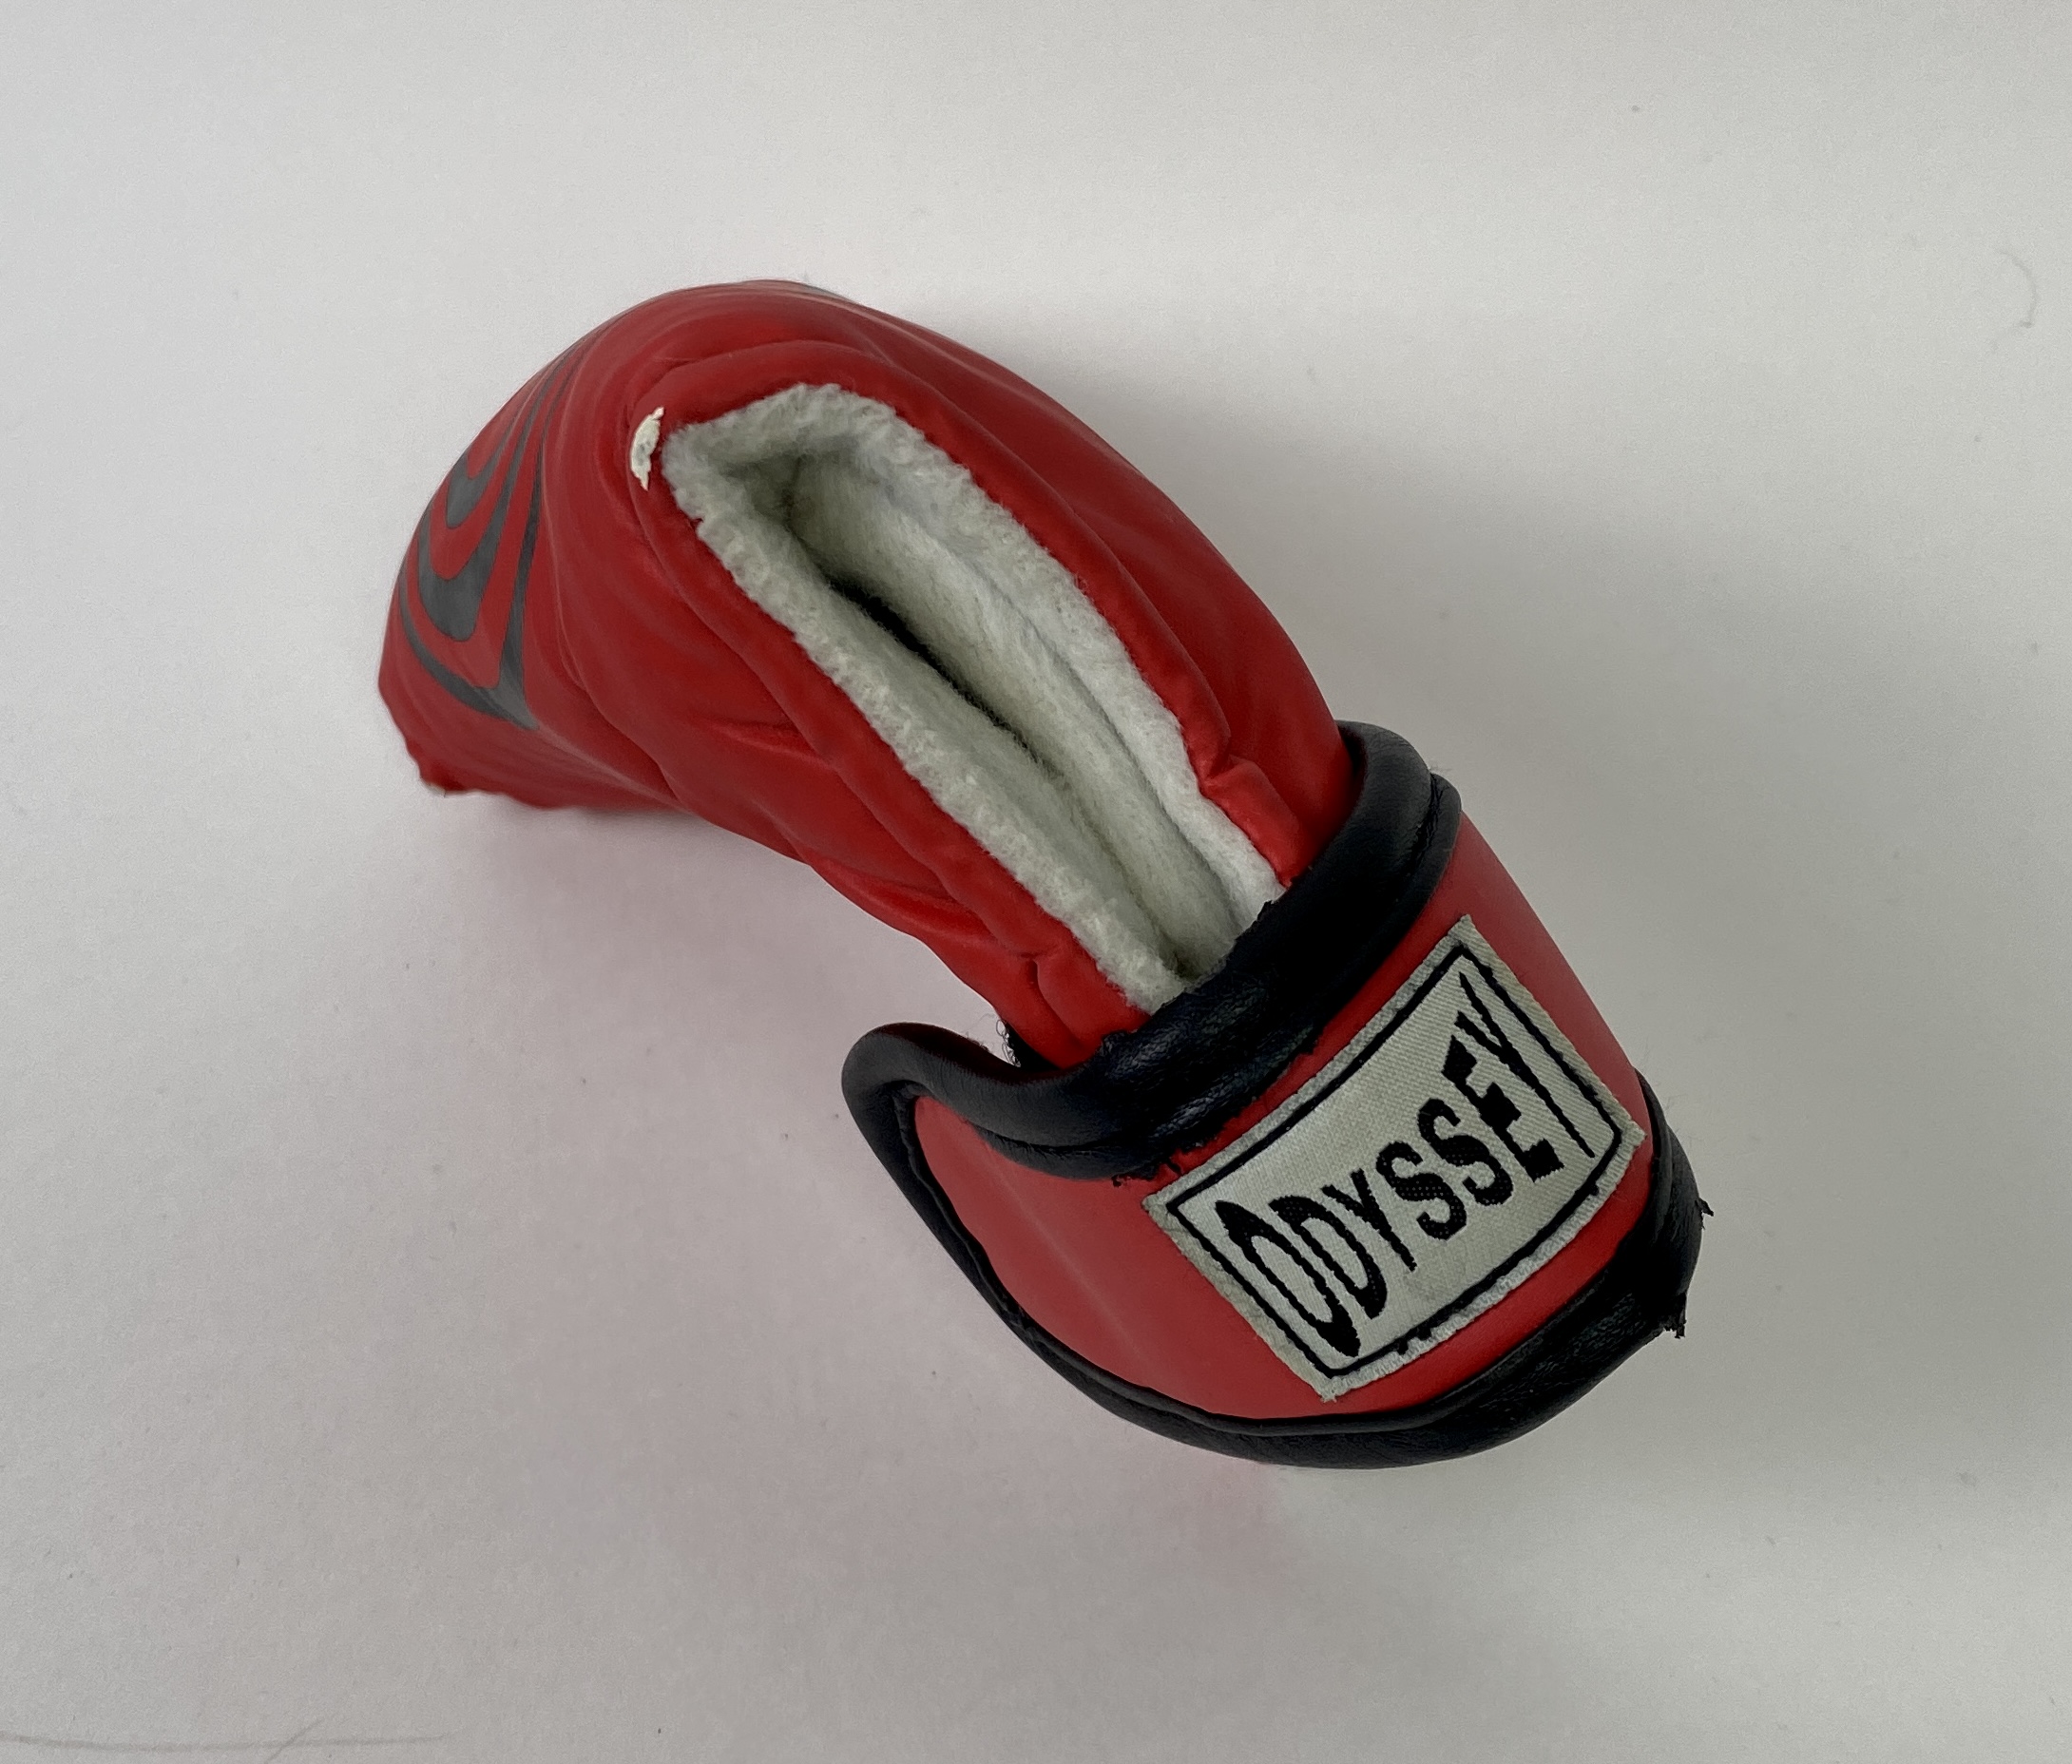 Used Odyssey Limited Edition Boxing Glove Blade Putter Head Cover ...